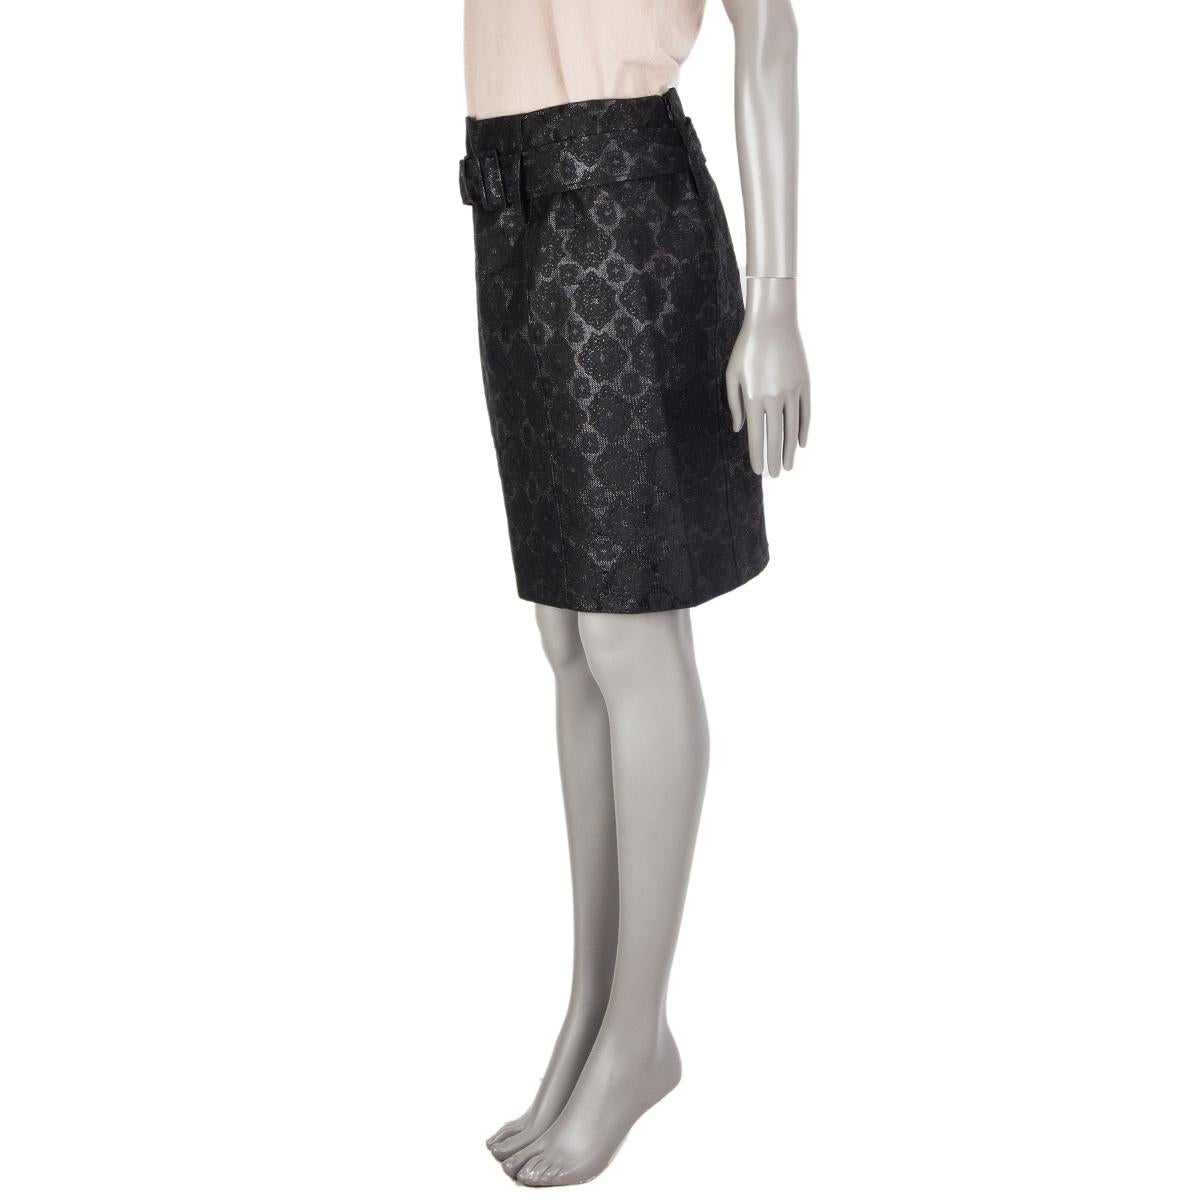 Prada brocade straight skirt in black silk (59%), cotton (31%), and polyester (10%). With belt loops and matching belt. Closes with invisible zipper on the back side. Lined in black fabric. Has been worn and is in excellent condition. 

Tag Size